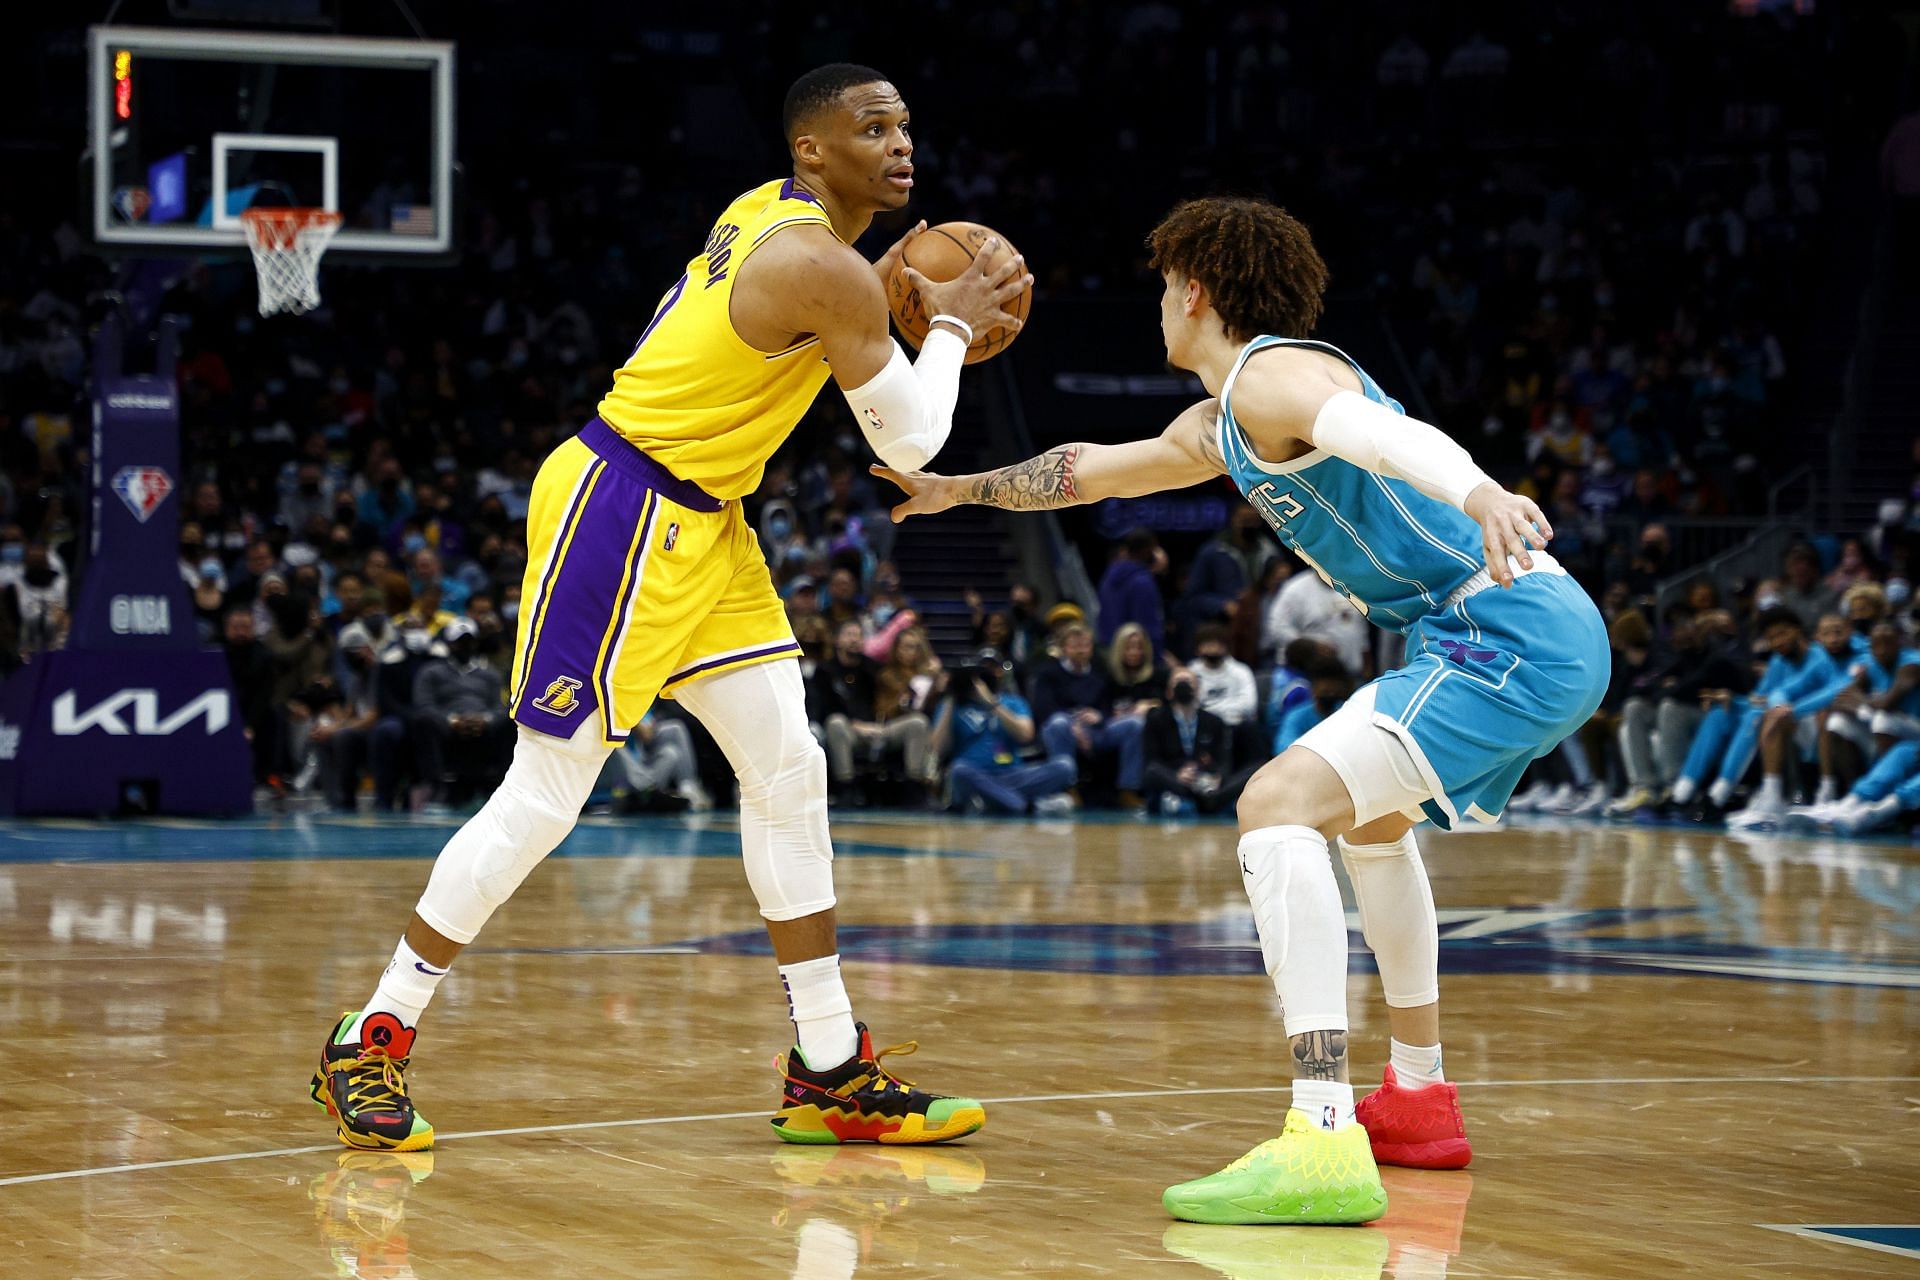 Russell Westbrook of the LA Lakers in a game against the Charlotte Hornets